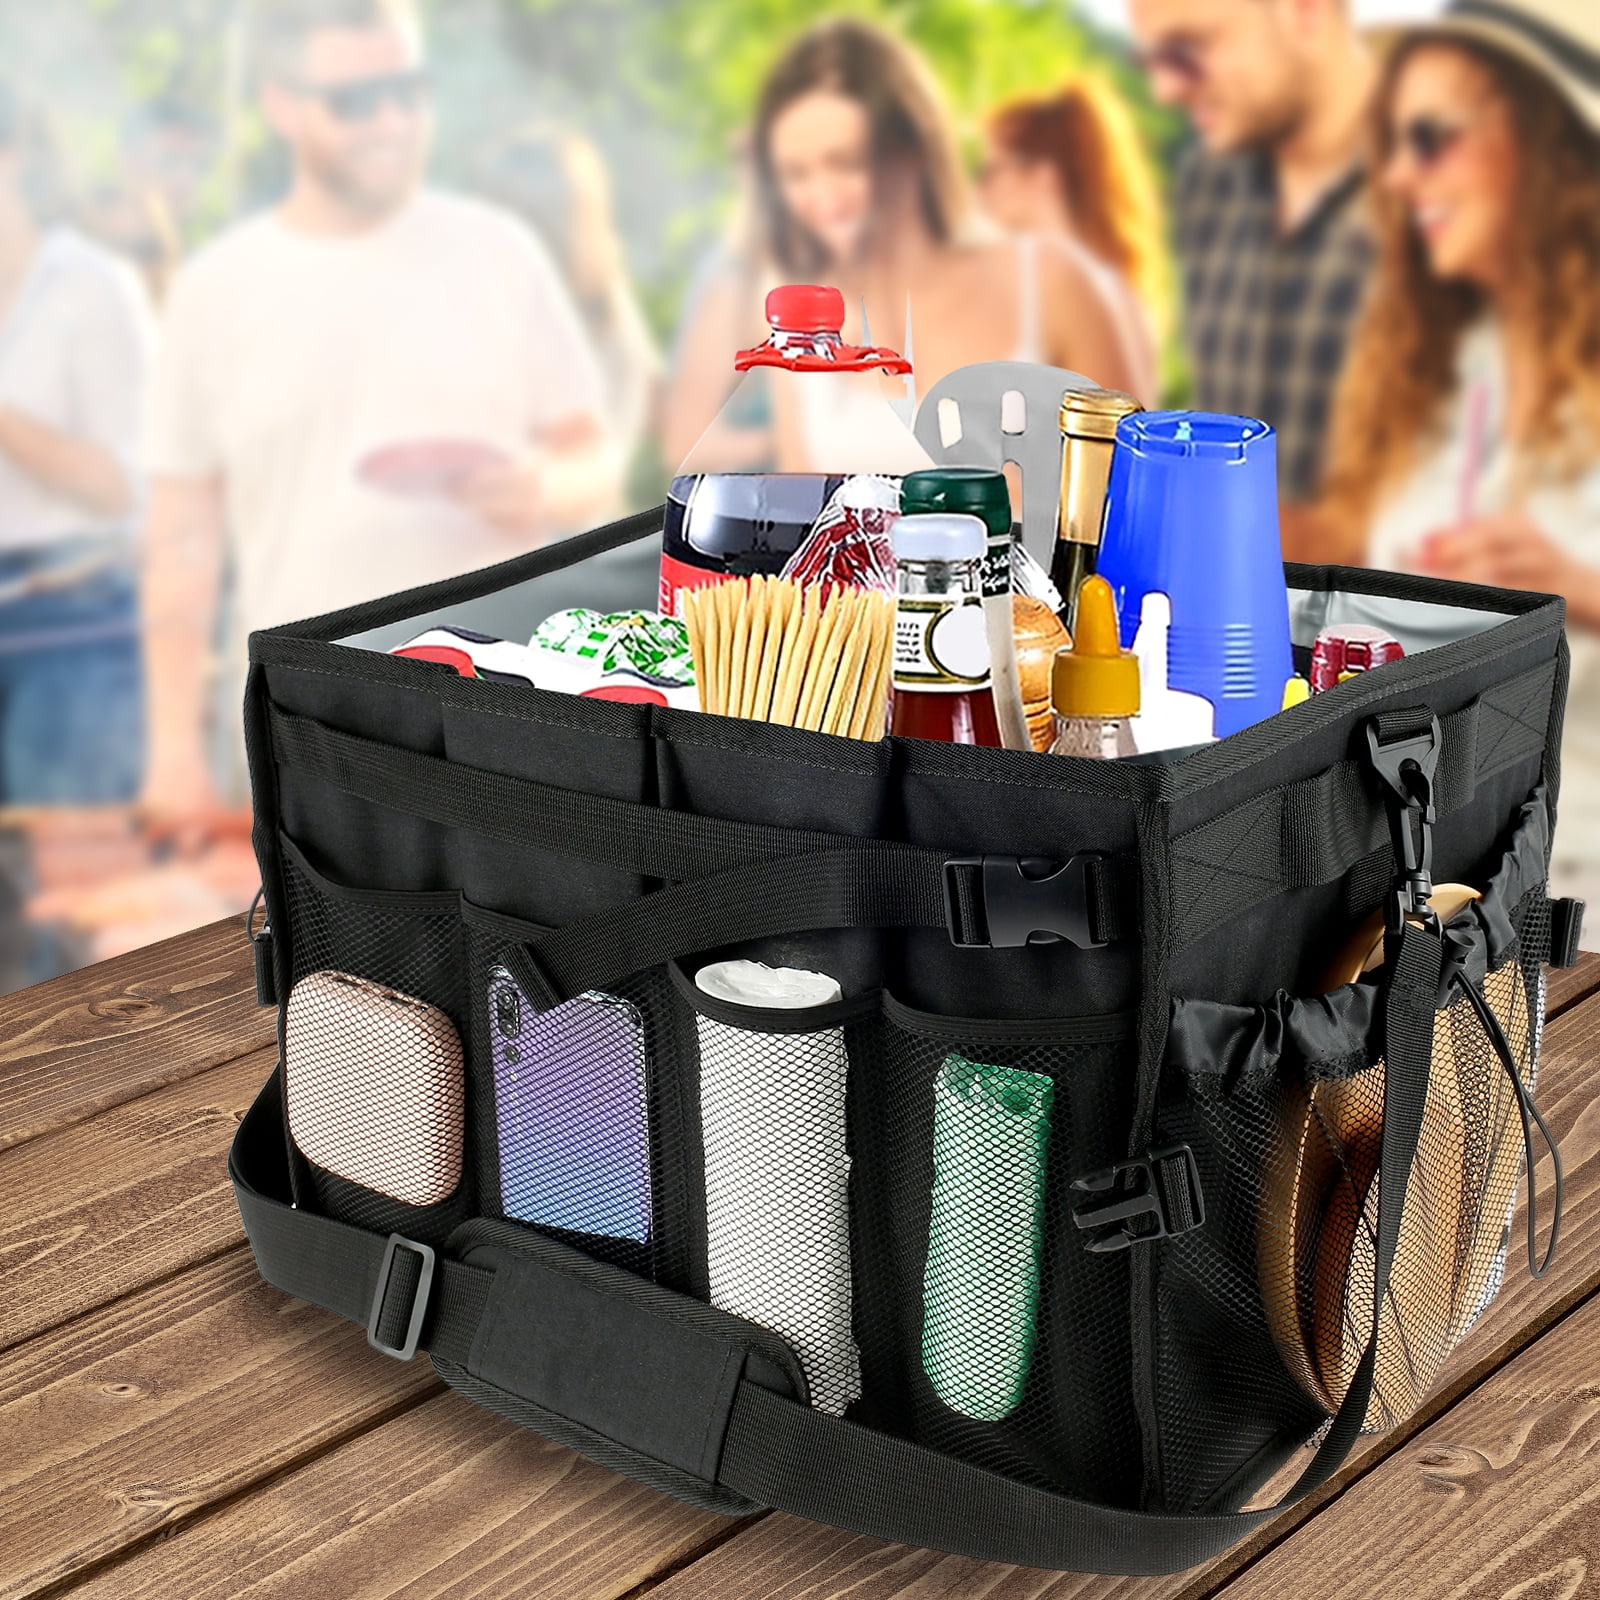 Stainless Steel Caddy Organizer—Condiment Caddy & BBQ Caddy with Paper Towel Holder—Utensil, Picnic, Grill & Camping Accessories—RV Patio Camper BBQ